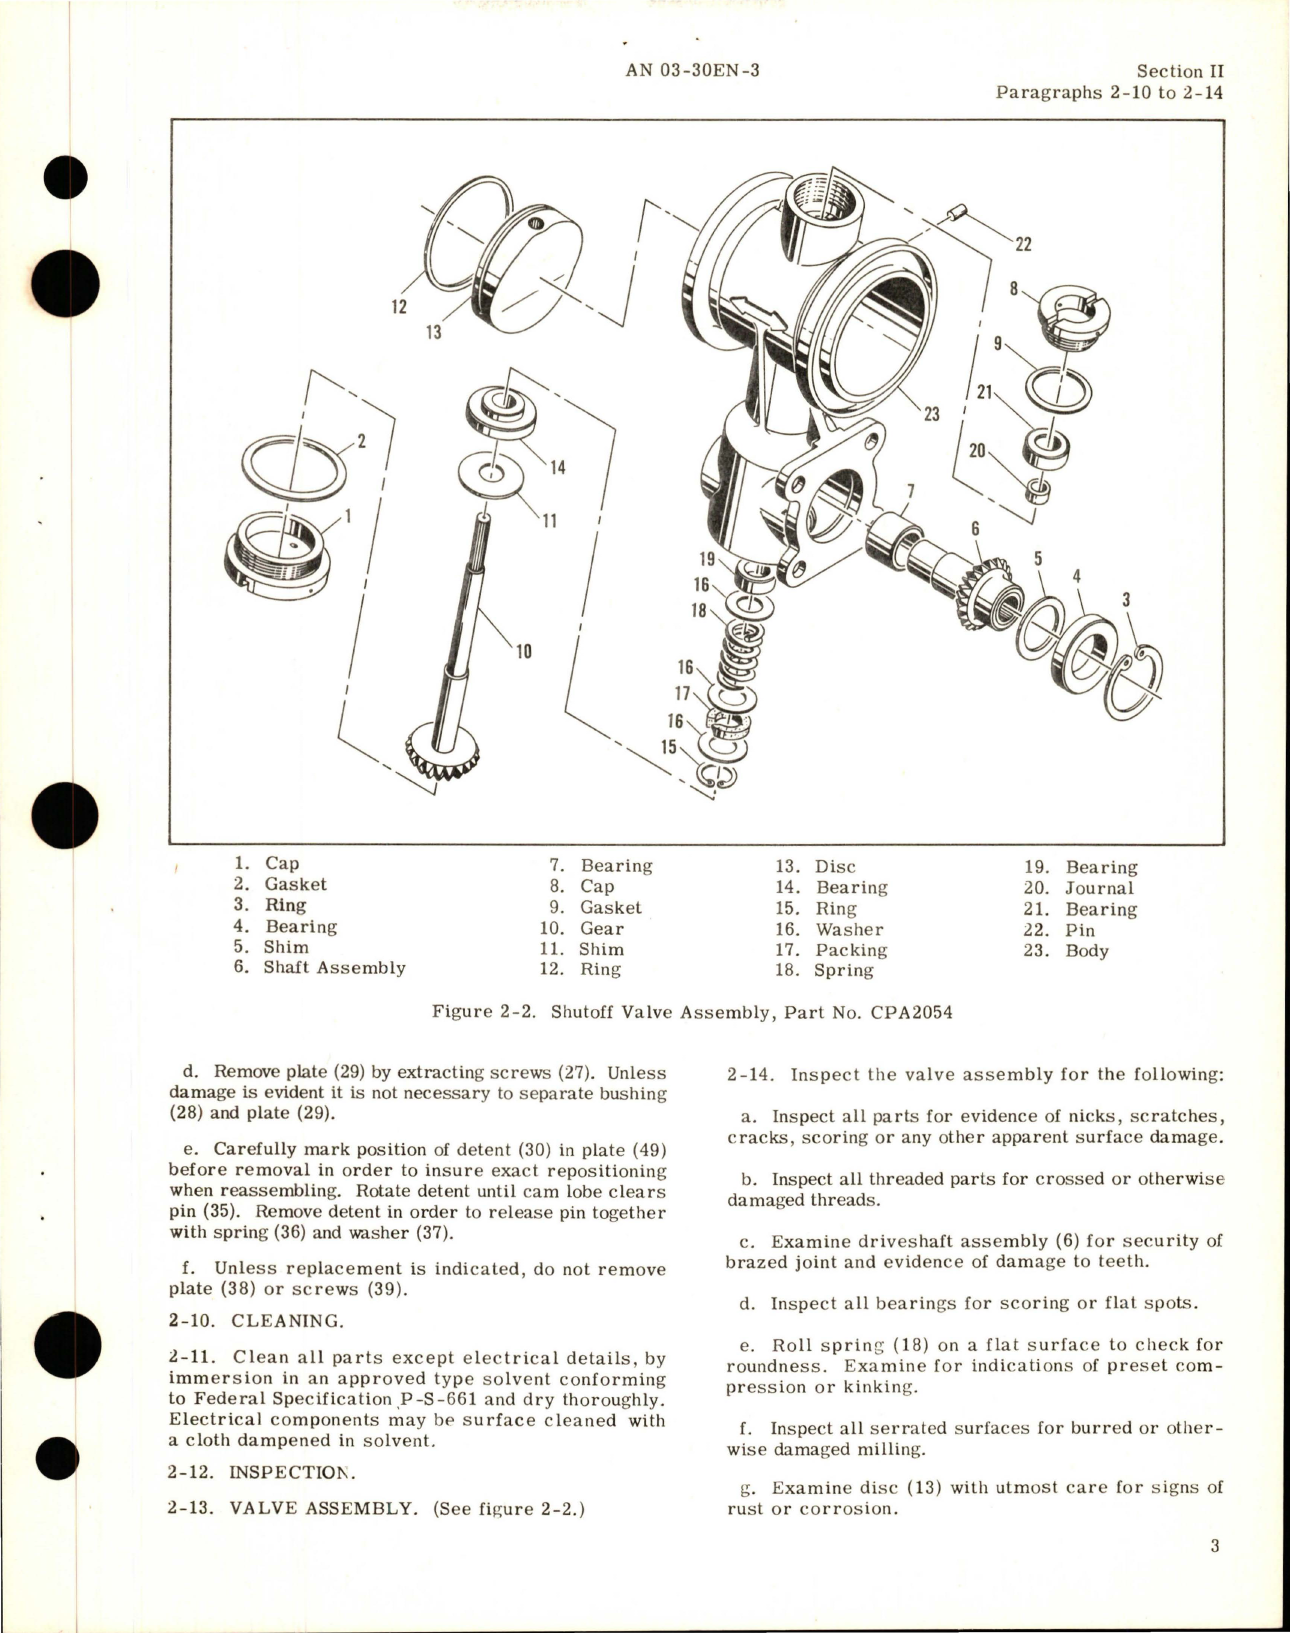 Sample page 7 from AirCorps Library document: Overhaul Instructions for Hot Air Shutoff Valves - Parts PAC 2274, PAC 2275, PAC 2279, PAC 2279-1, and PAC 3022